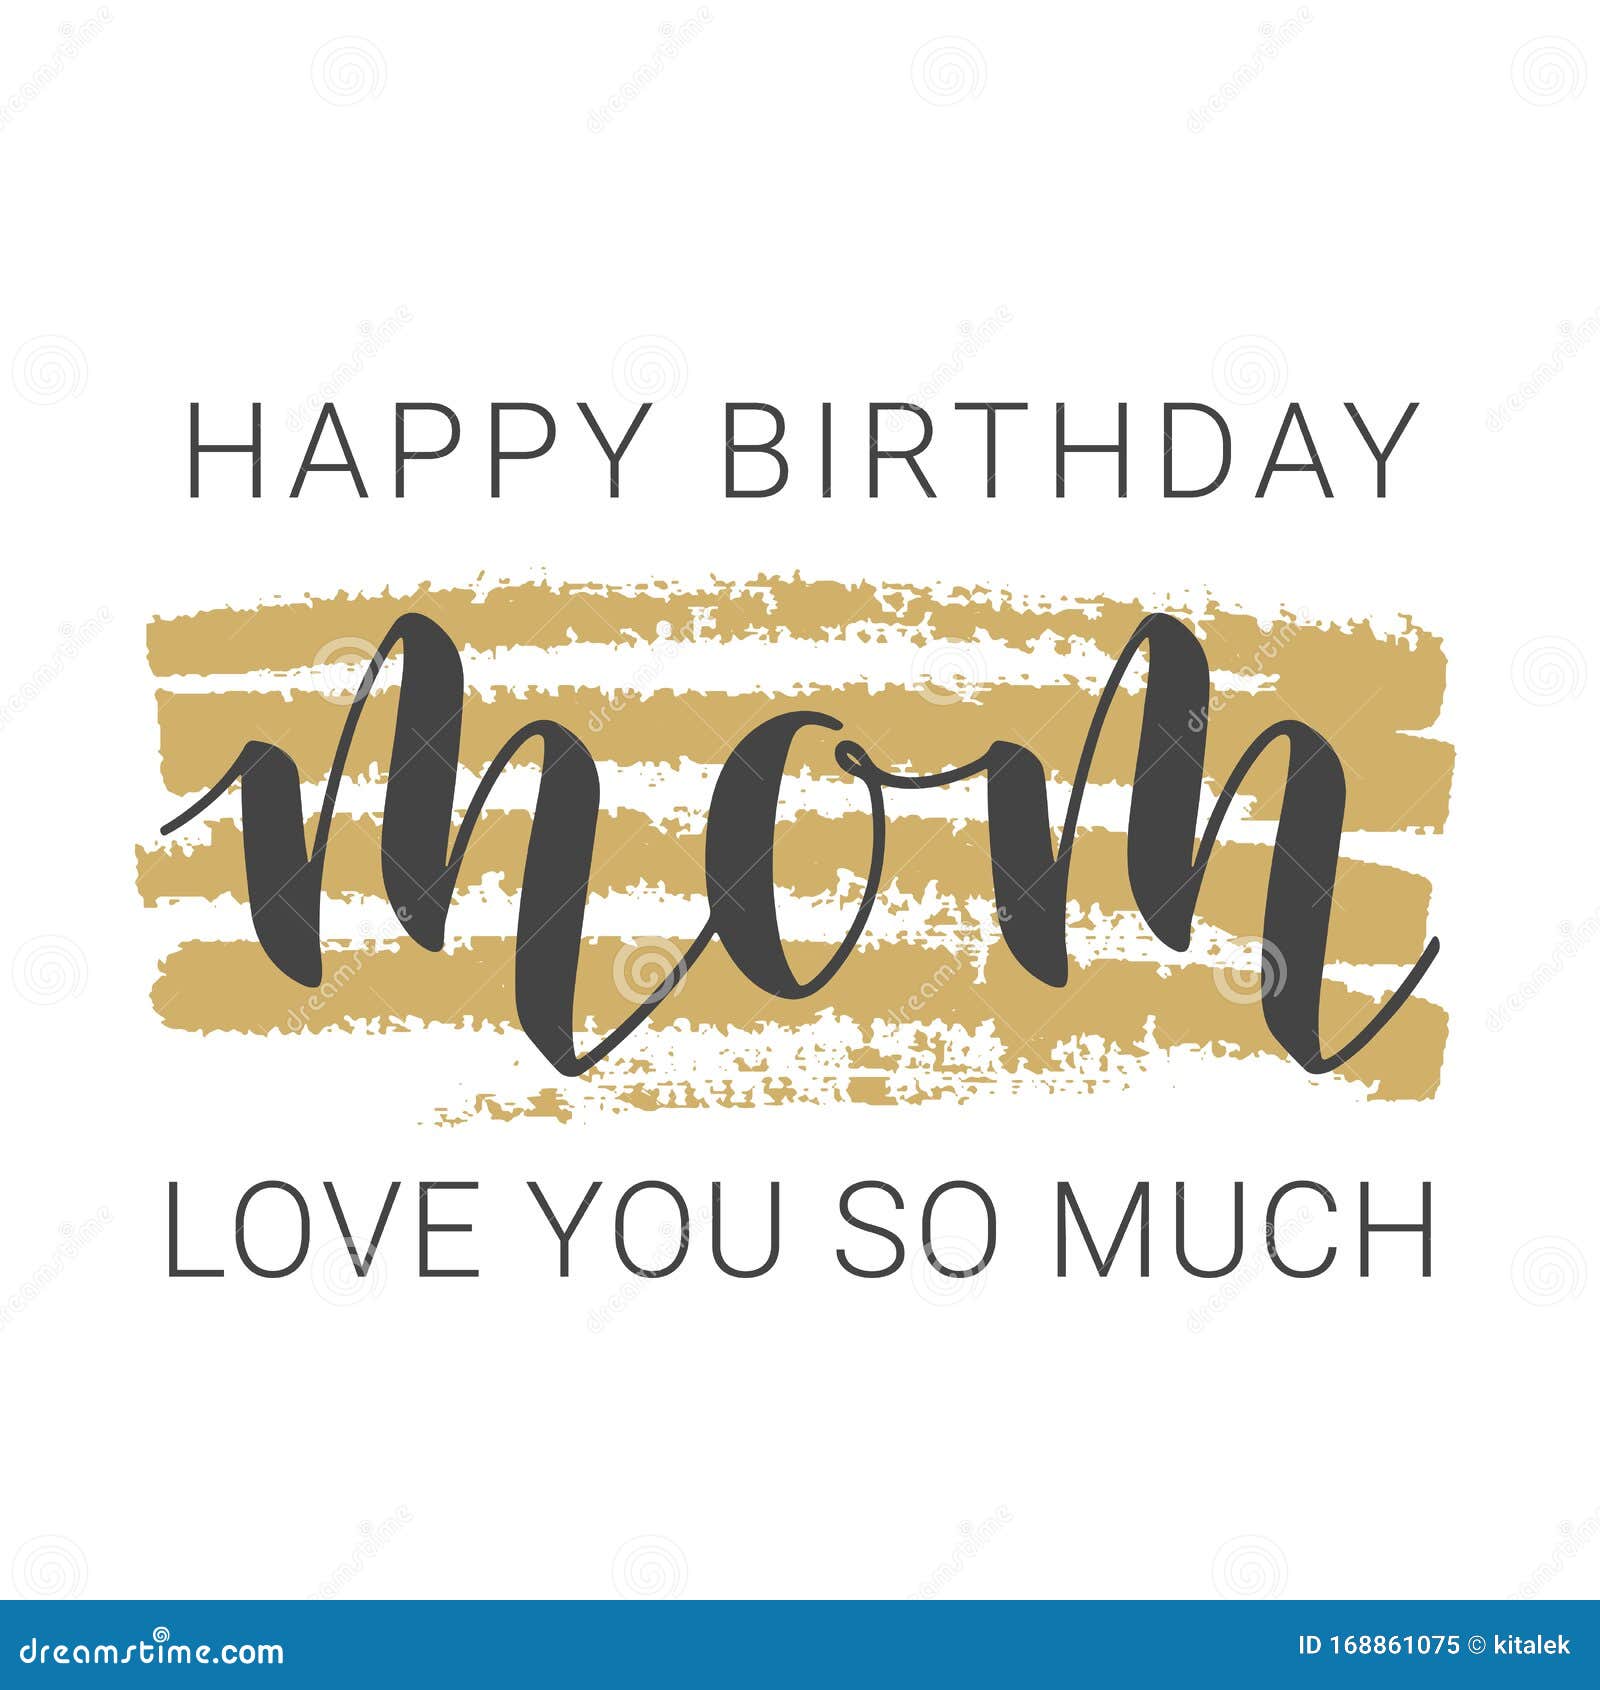 Handwritten Lettering of Happy Birthday Mom. Vector Illustration With Mom Birthday Card Template